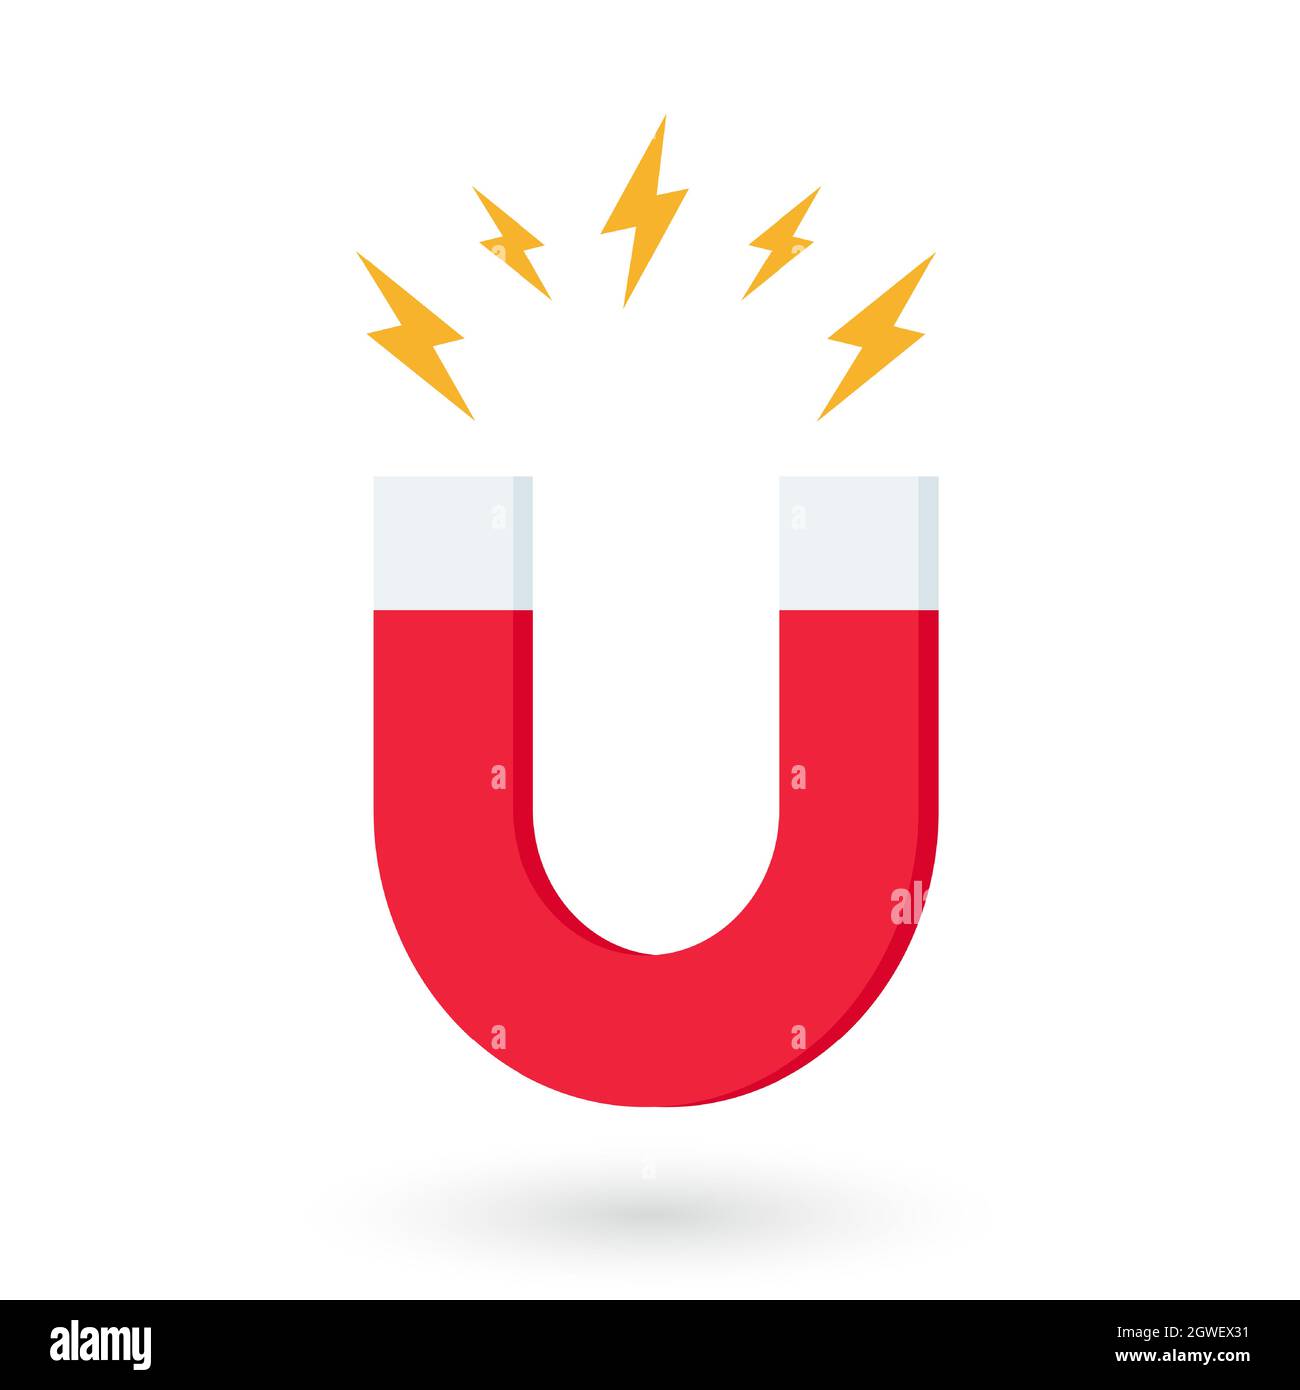 Red horseshoe magnet with magnetic power sign on white background. u-shaped magnet icon. Magnetism, magnetize, attraction concept. Vector illustration Stock Vector